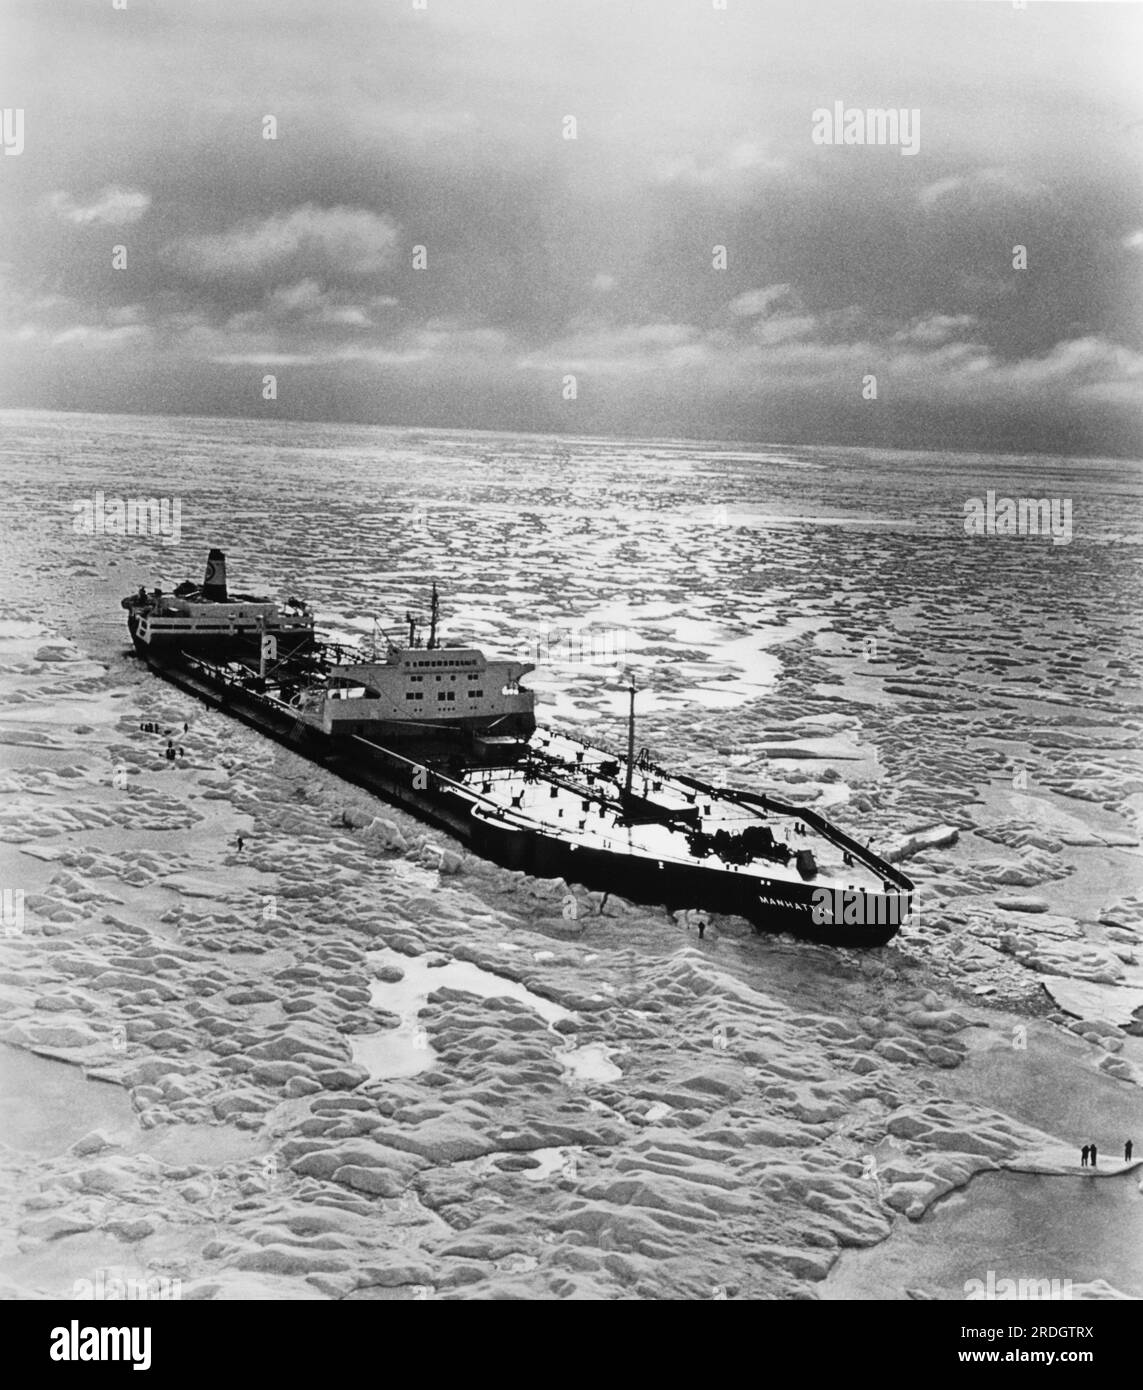 Canada: November, 1969 The SS Manhattan, an oil tanker outfitted